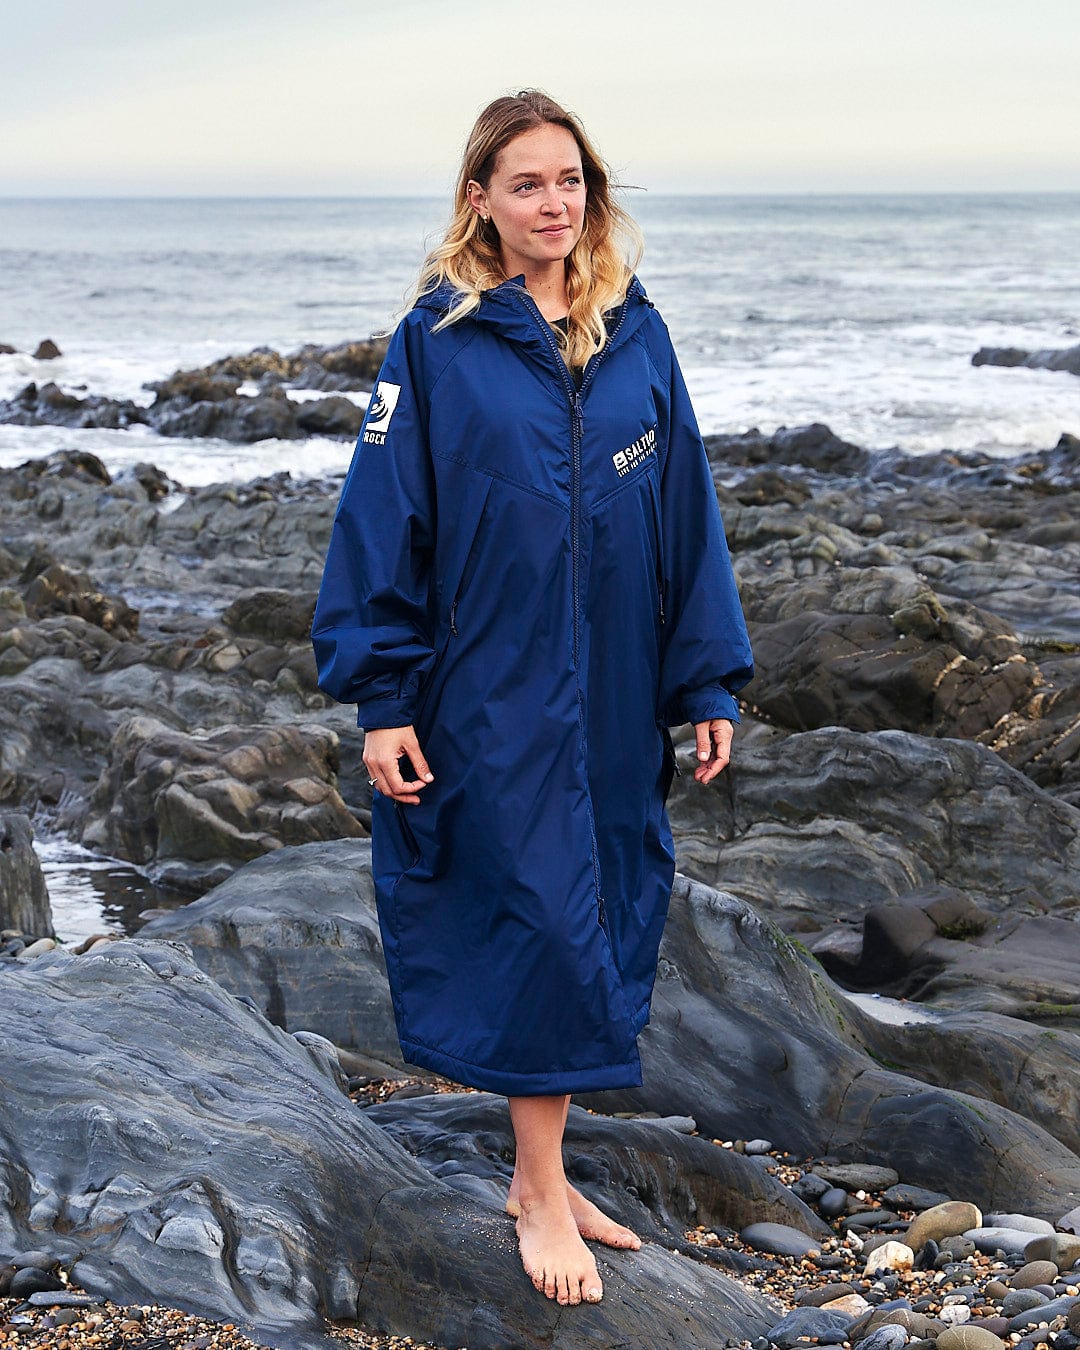 A woman stands barefoot on a rocky beach, wearing a large blue Saltrock Recycled Four Seasons Changing Robe, looking off into the distance with a thoughtful expression.